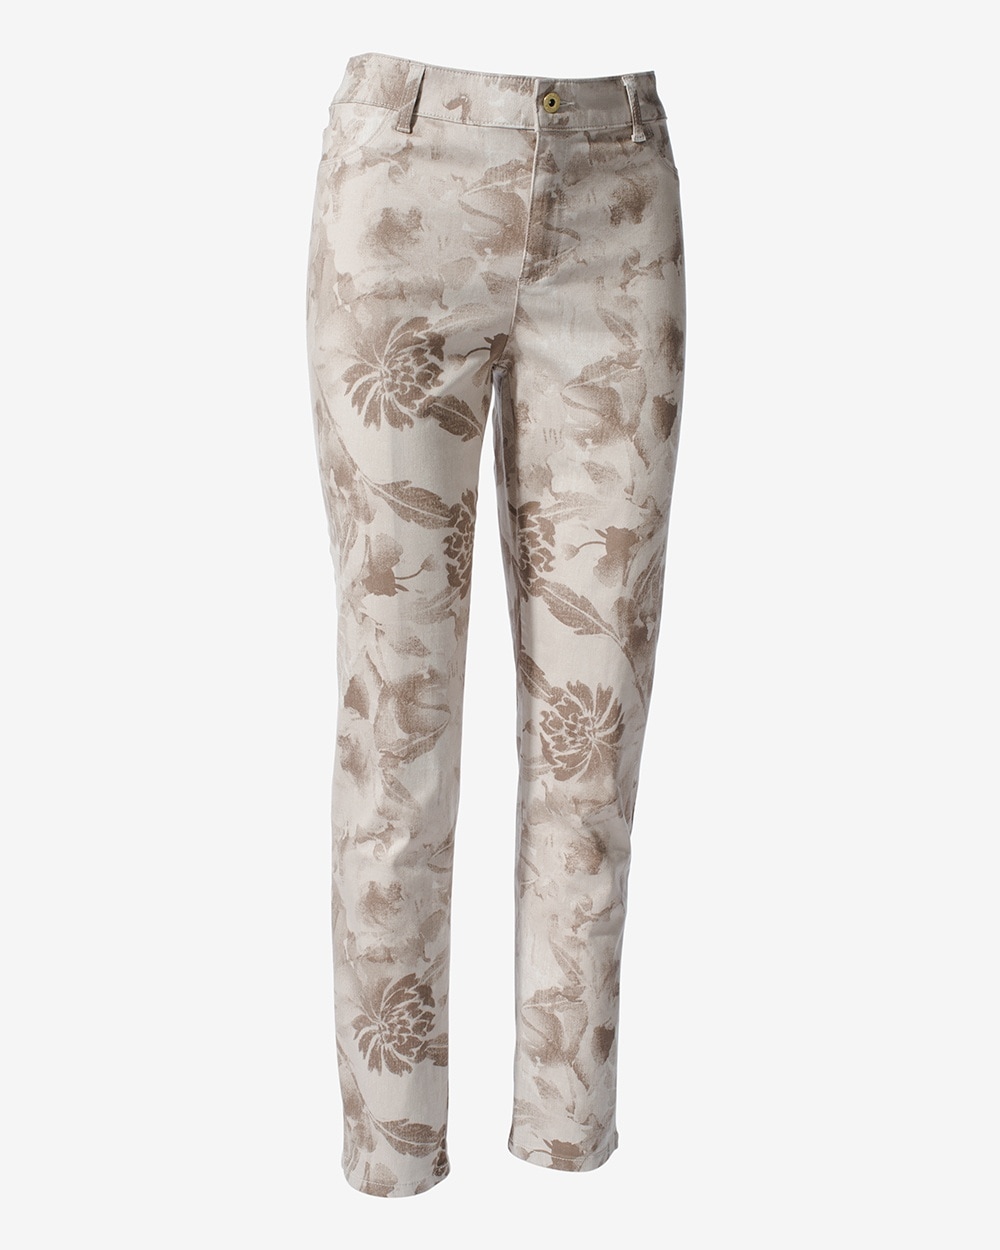 Frenzy of Floral Sateen Girlfriend Jeans